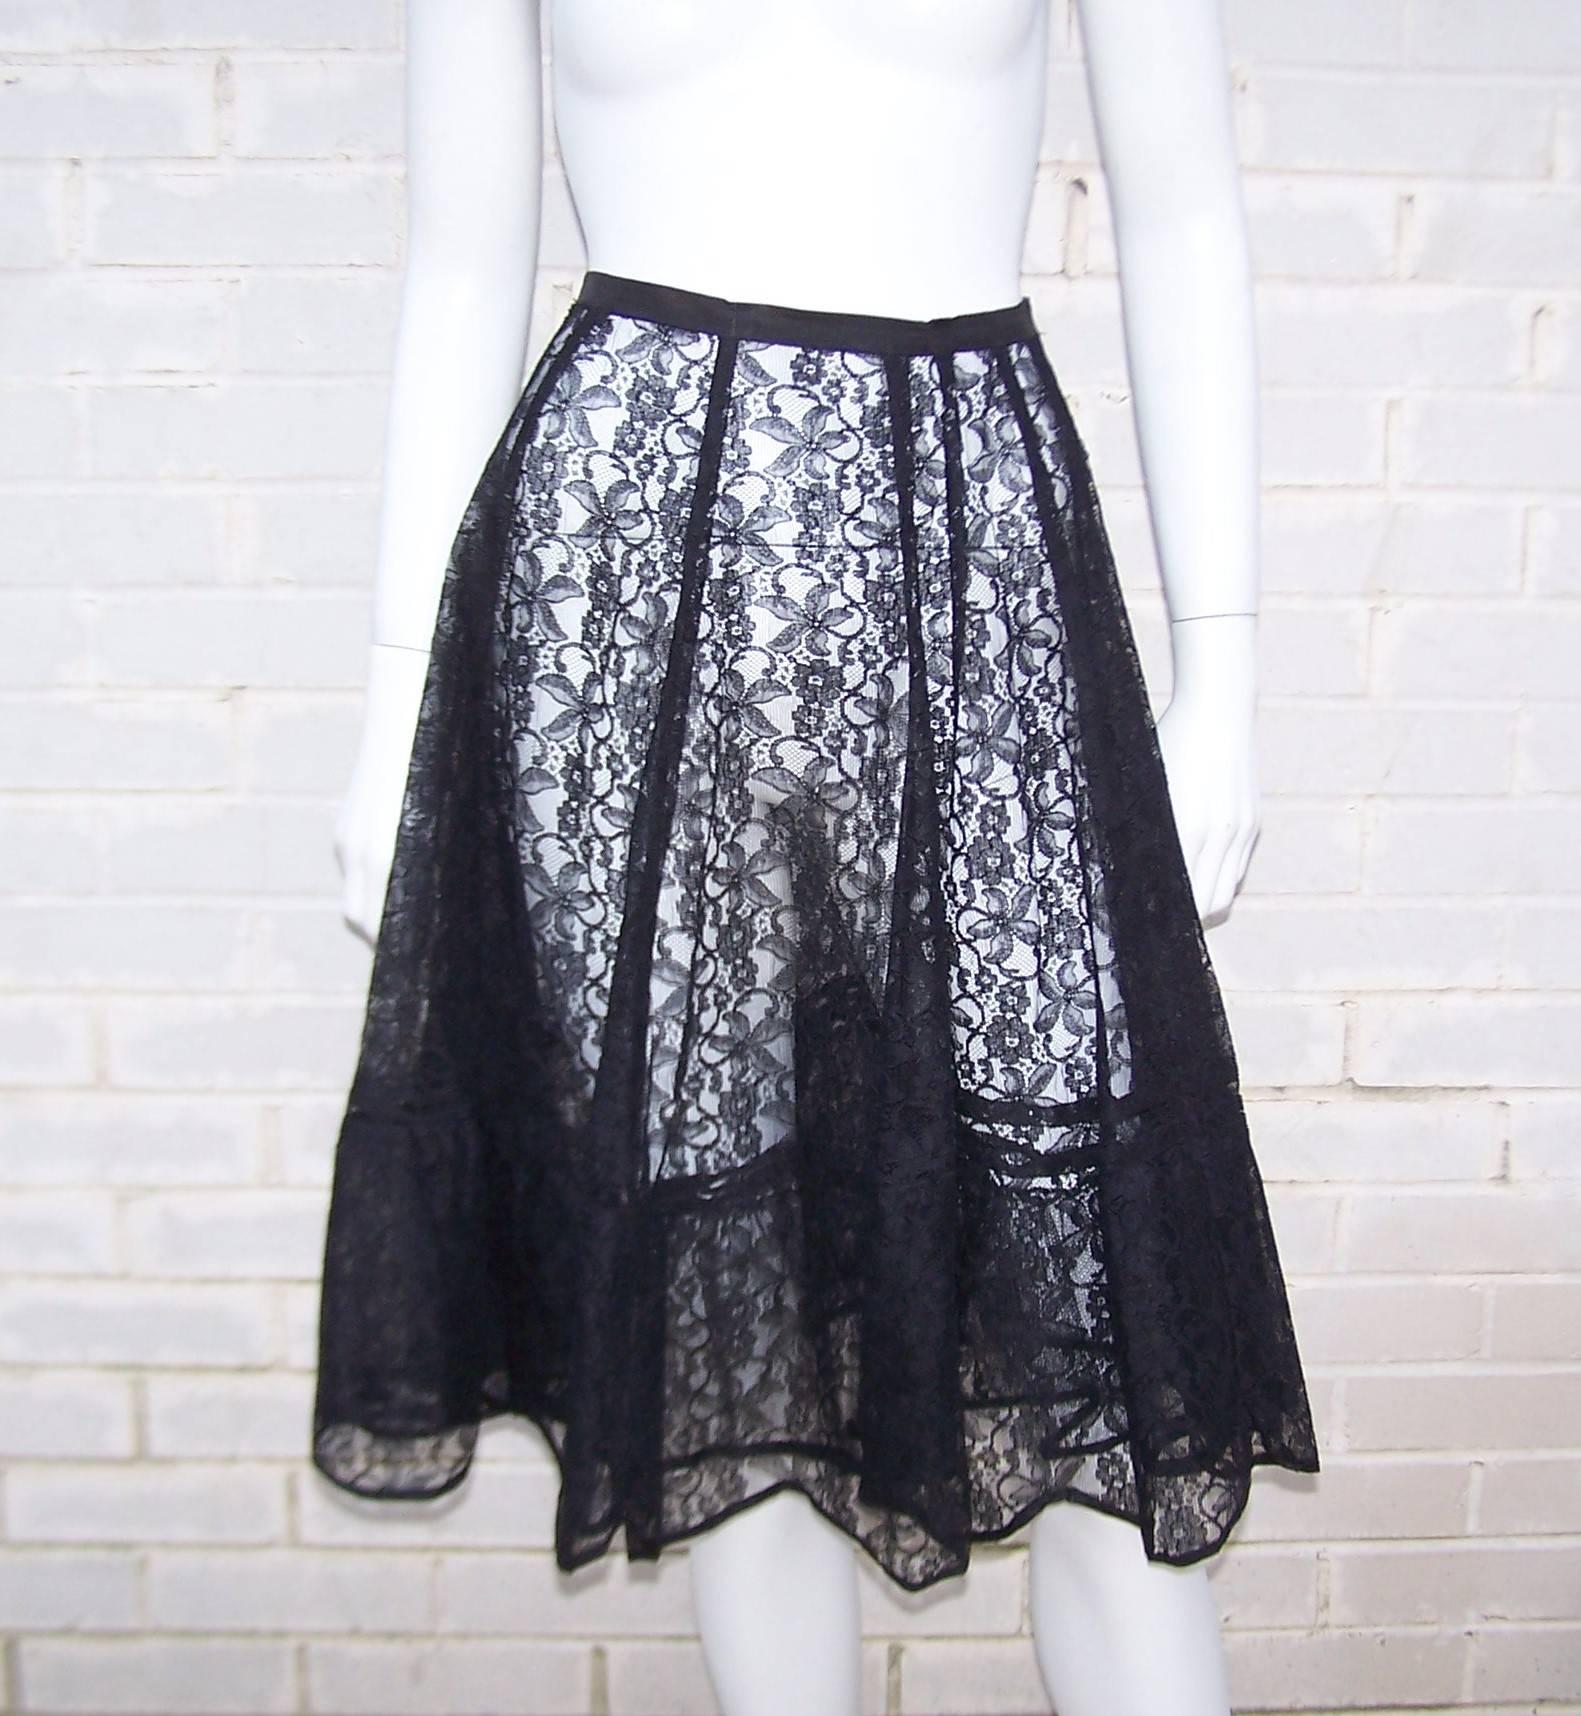 Layers of lace can be just as seductive as something that leaves little to the imagination.  This 1950's black lace underskirt by Tempo Lingerie was made for layering under a circle skirt or full skirted dress.  The intricate nylon lace is paneled